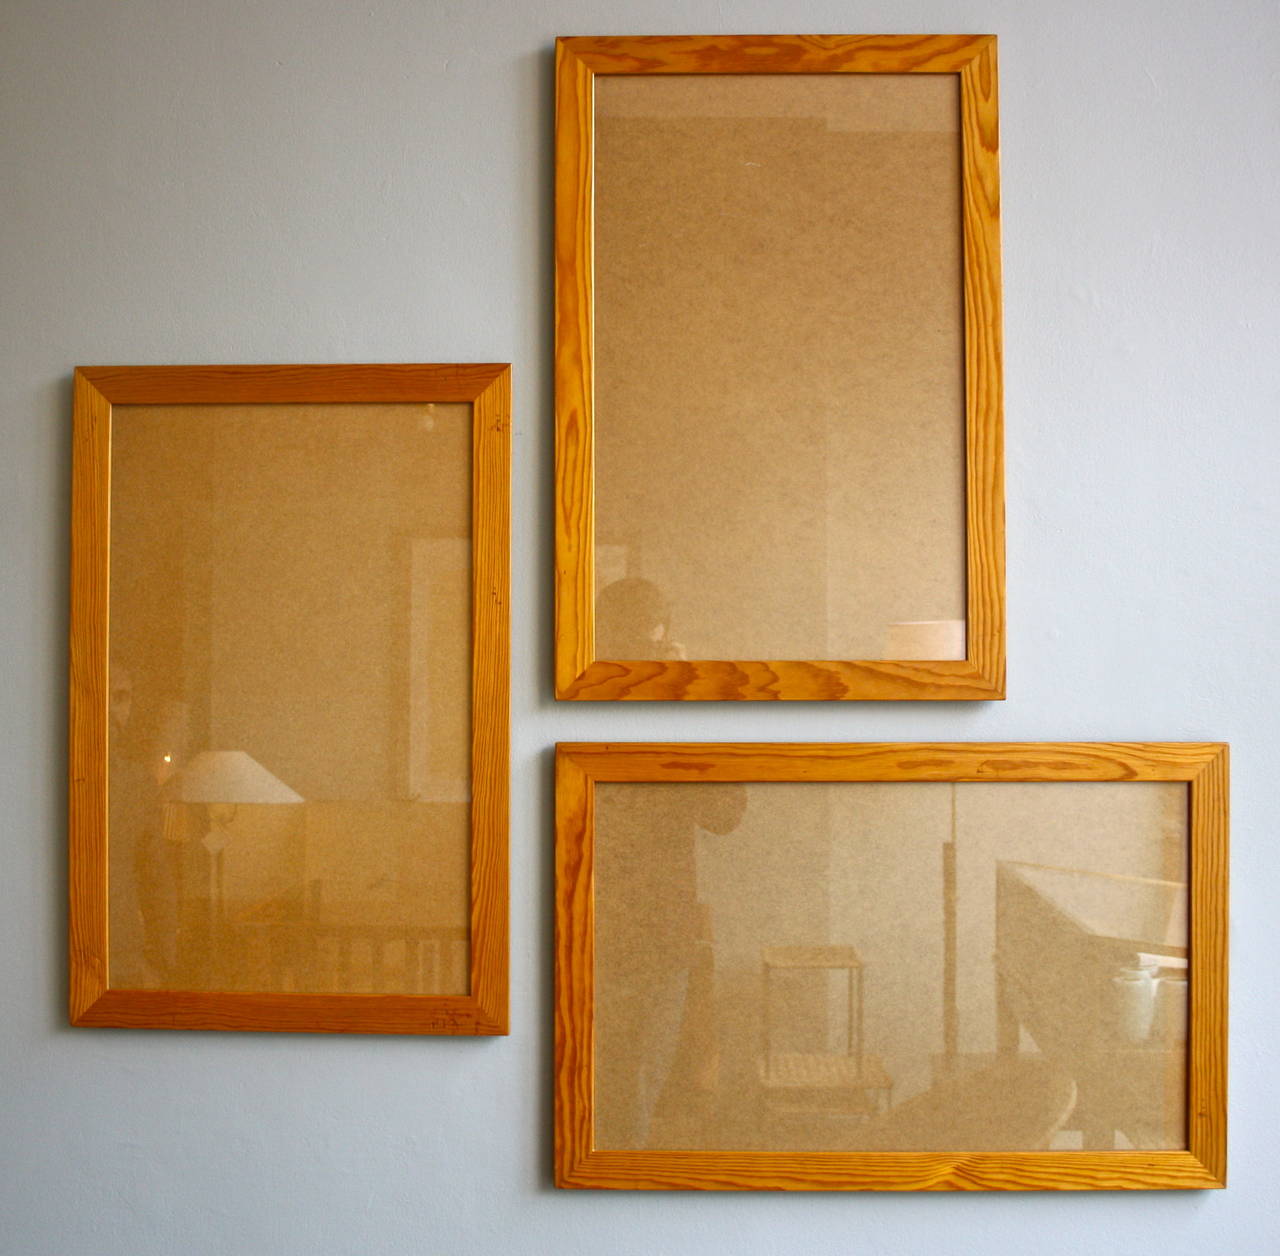 Individual large pine frames designed by Mogens Koch and made by Rud Rasmussen Snedkerier. Great color to the wood.